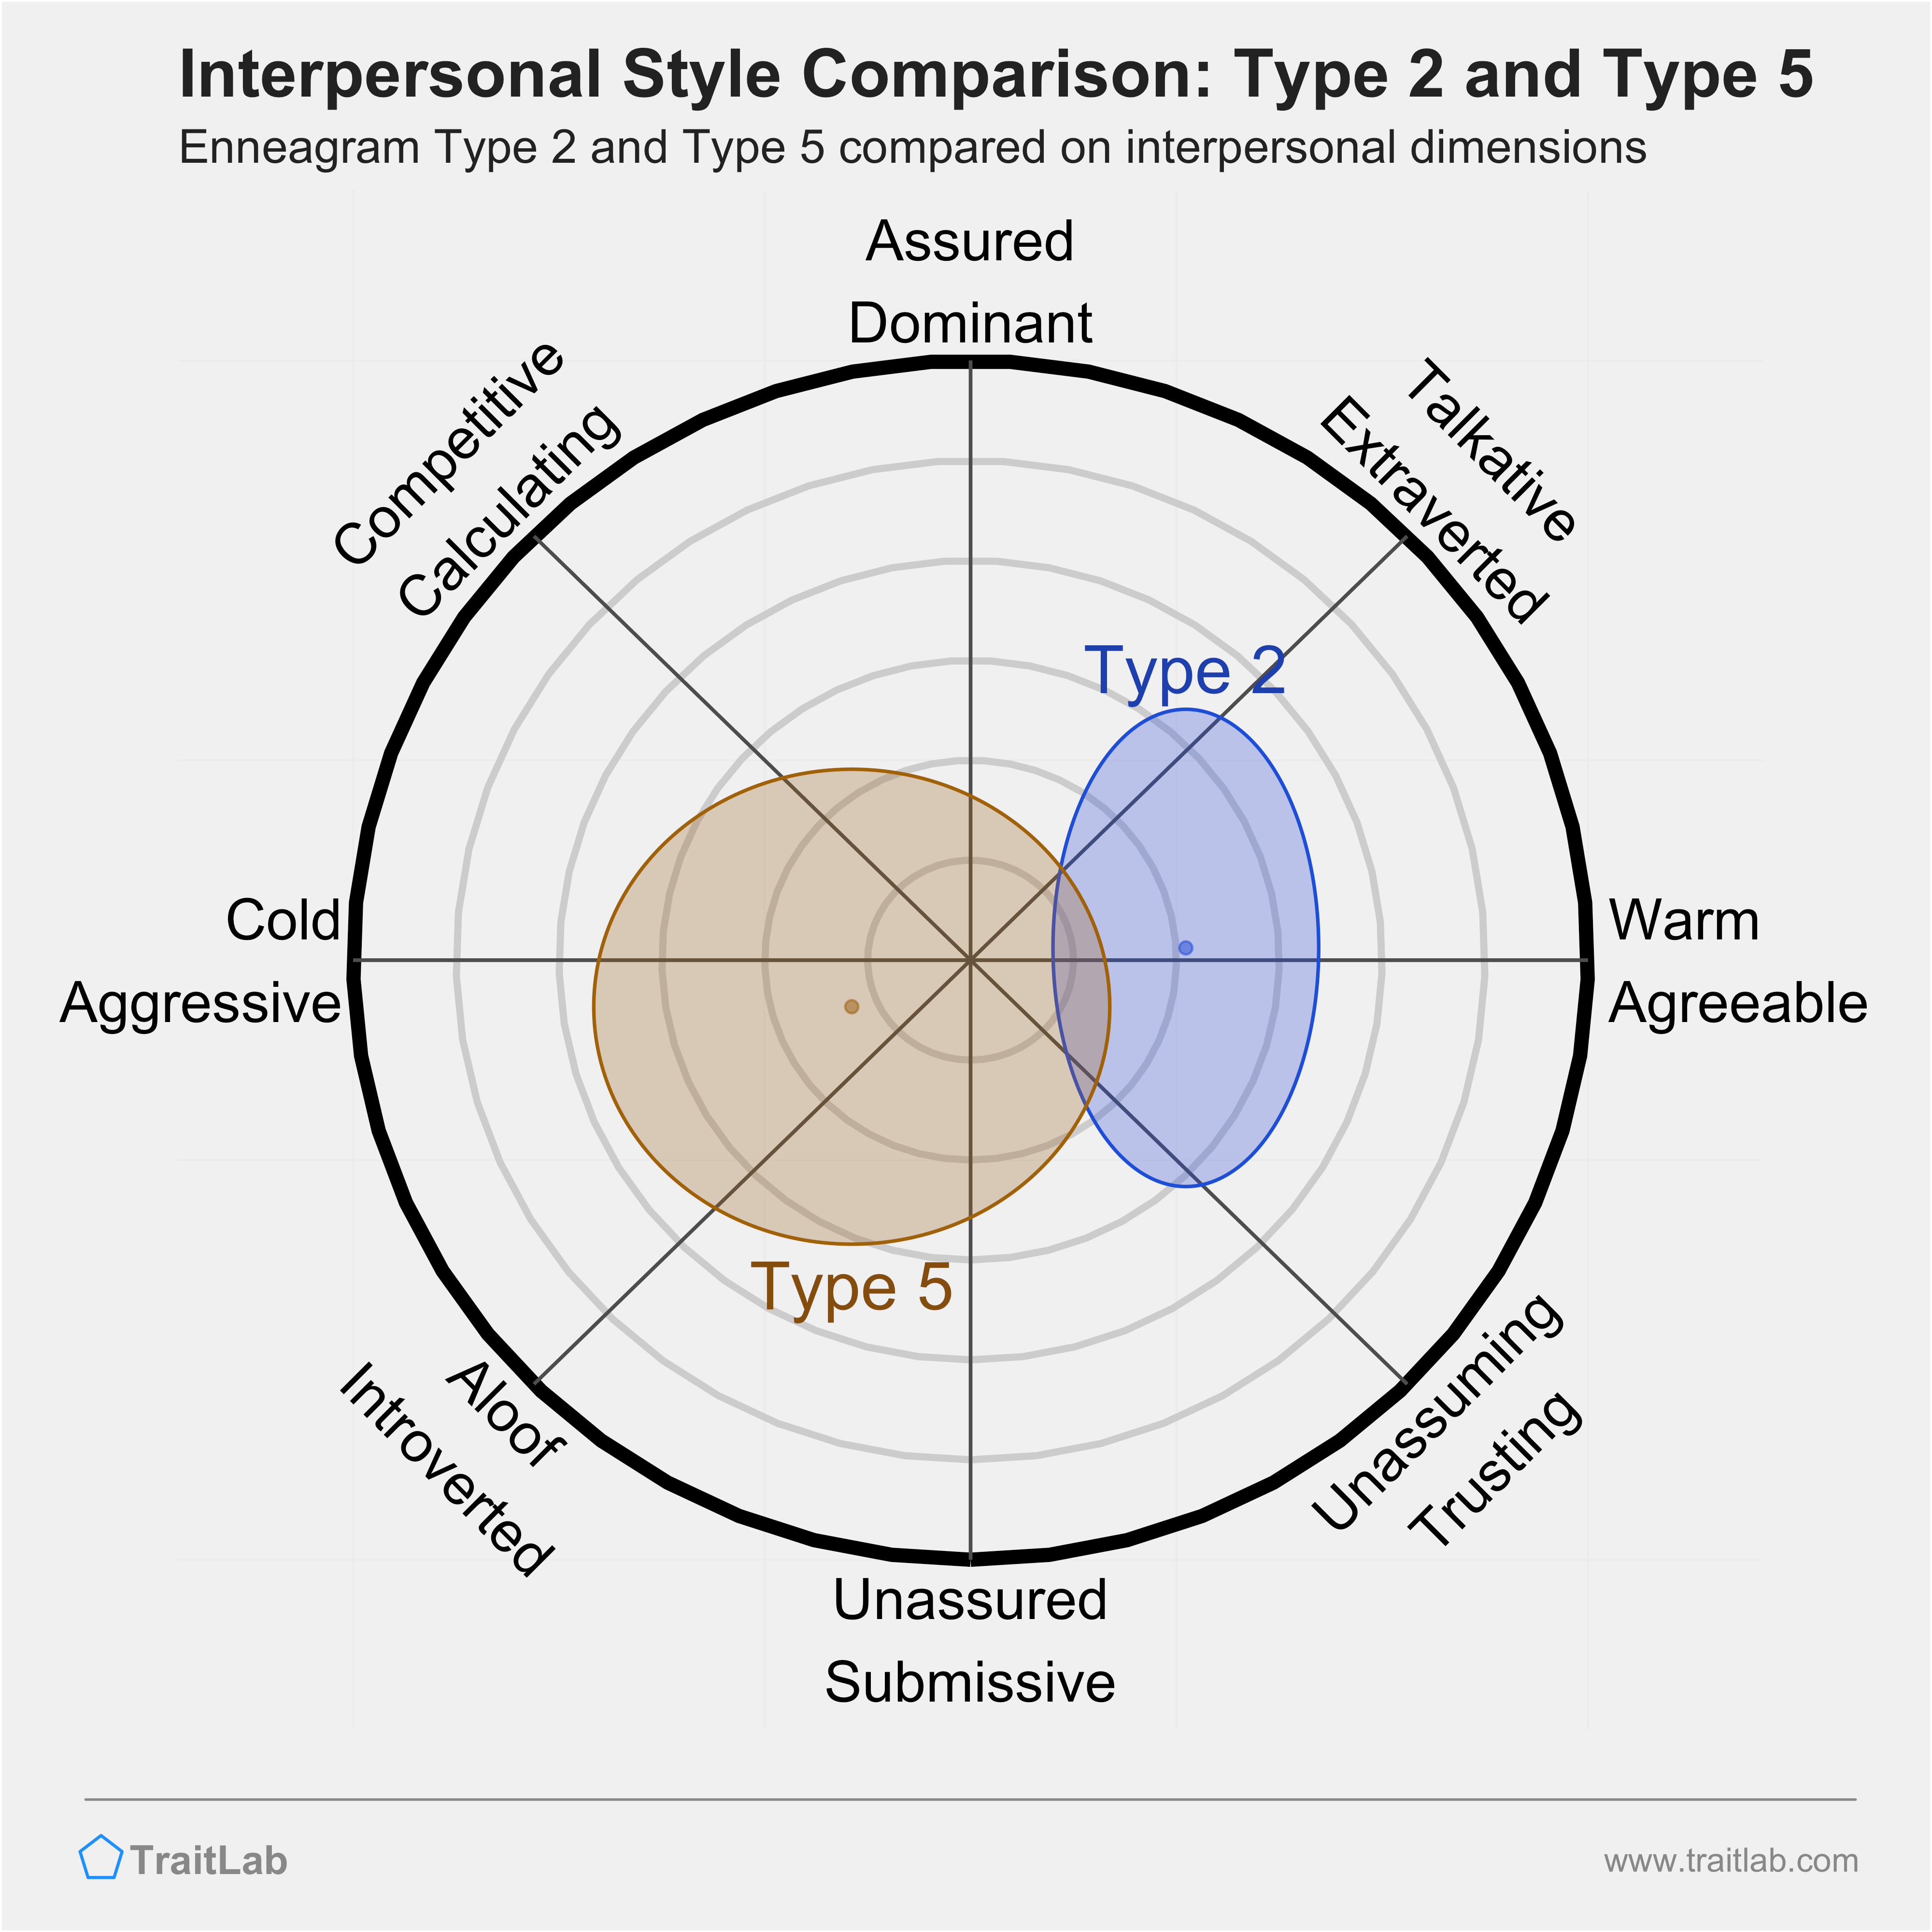 Enneagram Type 2 and Type 5 comparison across interpersonal dimensions